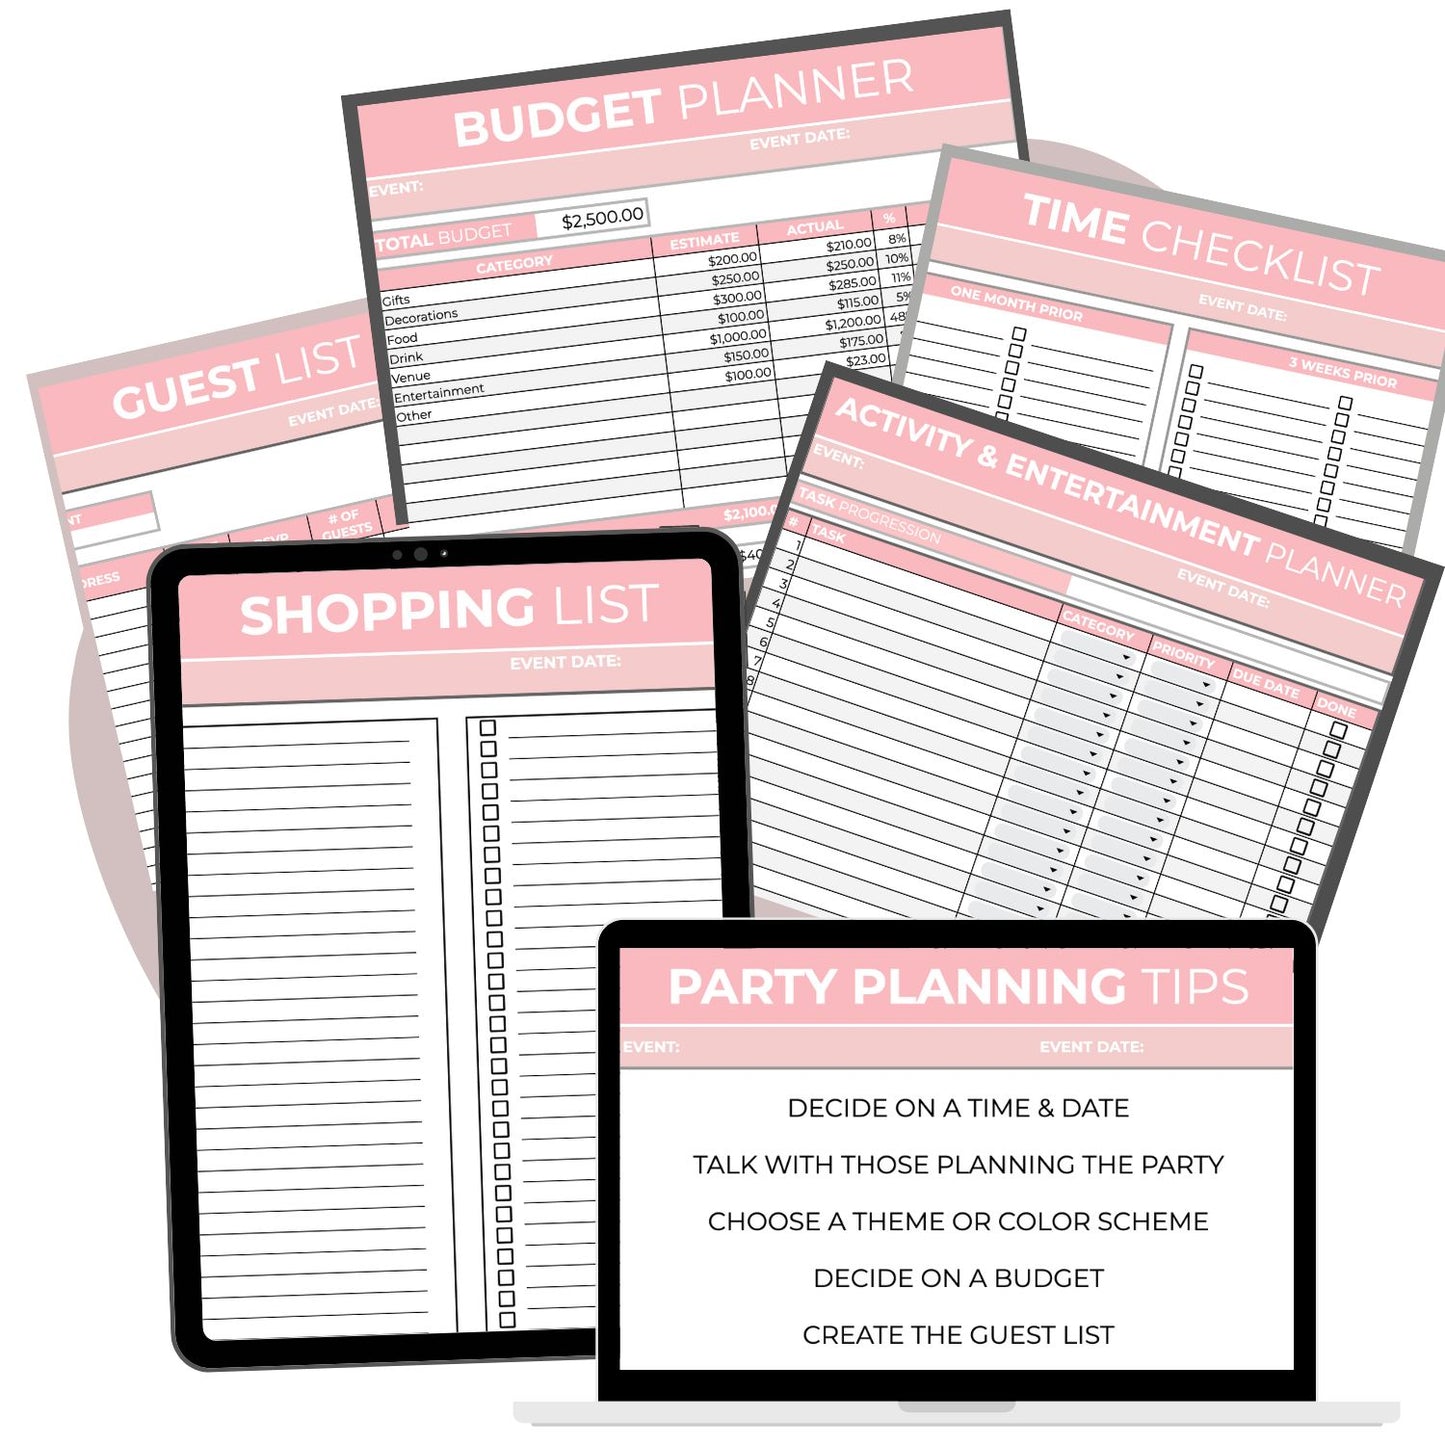 6 pages inside the printable party planner and editable spreadsheets including - activity planner, party planning tips, shopping list, guest list, budget planner, and an event planning checklist.